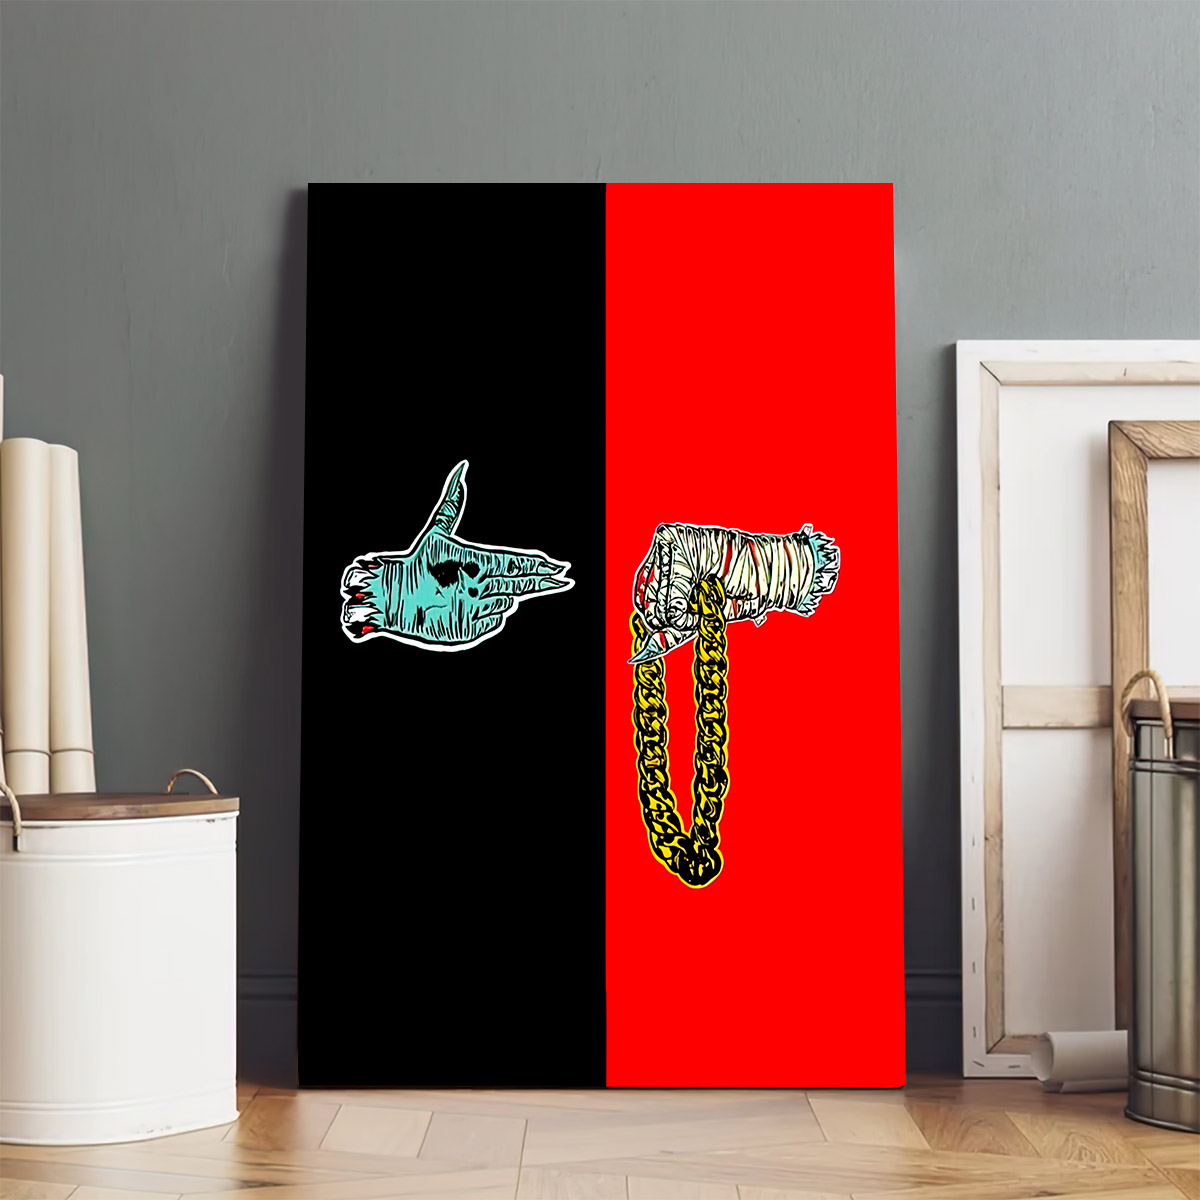 Run The Jewels Limited Band Poster Wall Art Canvas